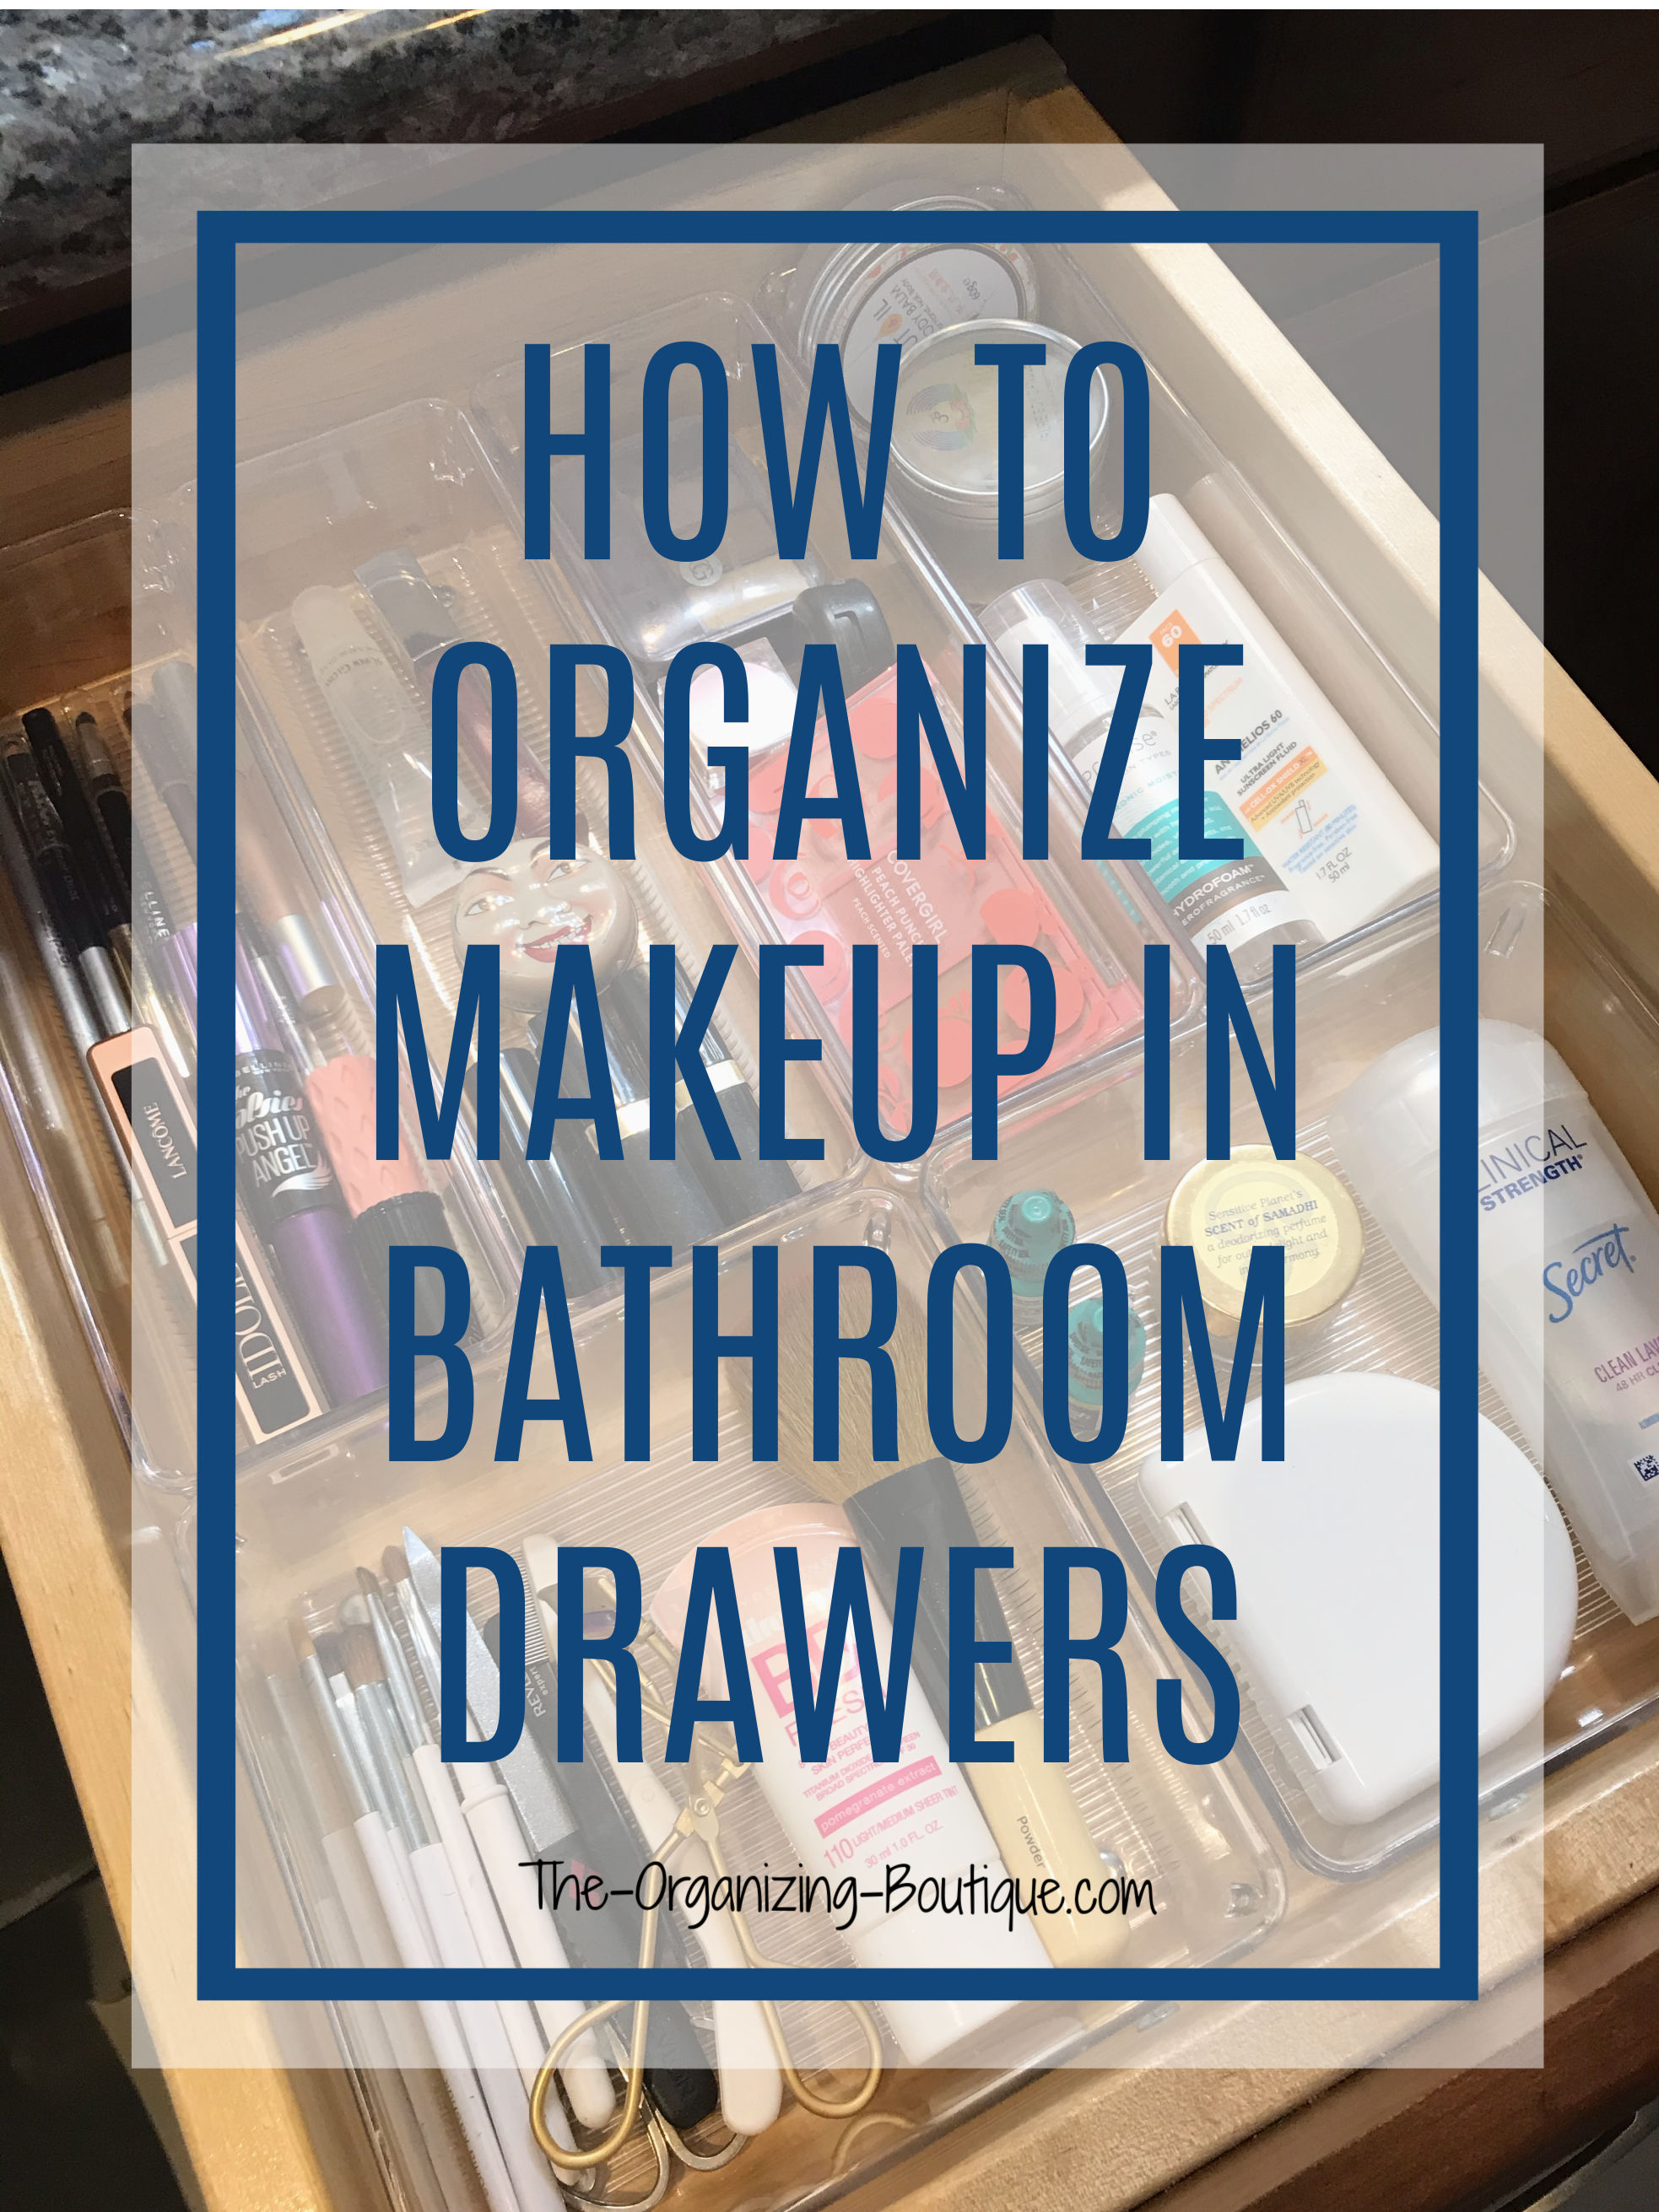 How To Organize Makeup In Bathroom Drawers